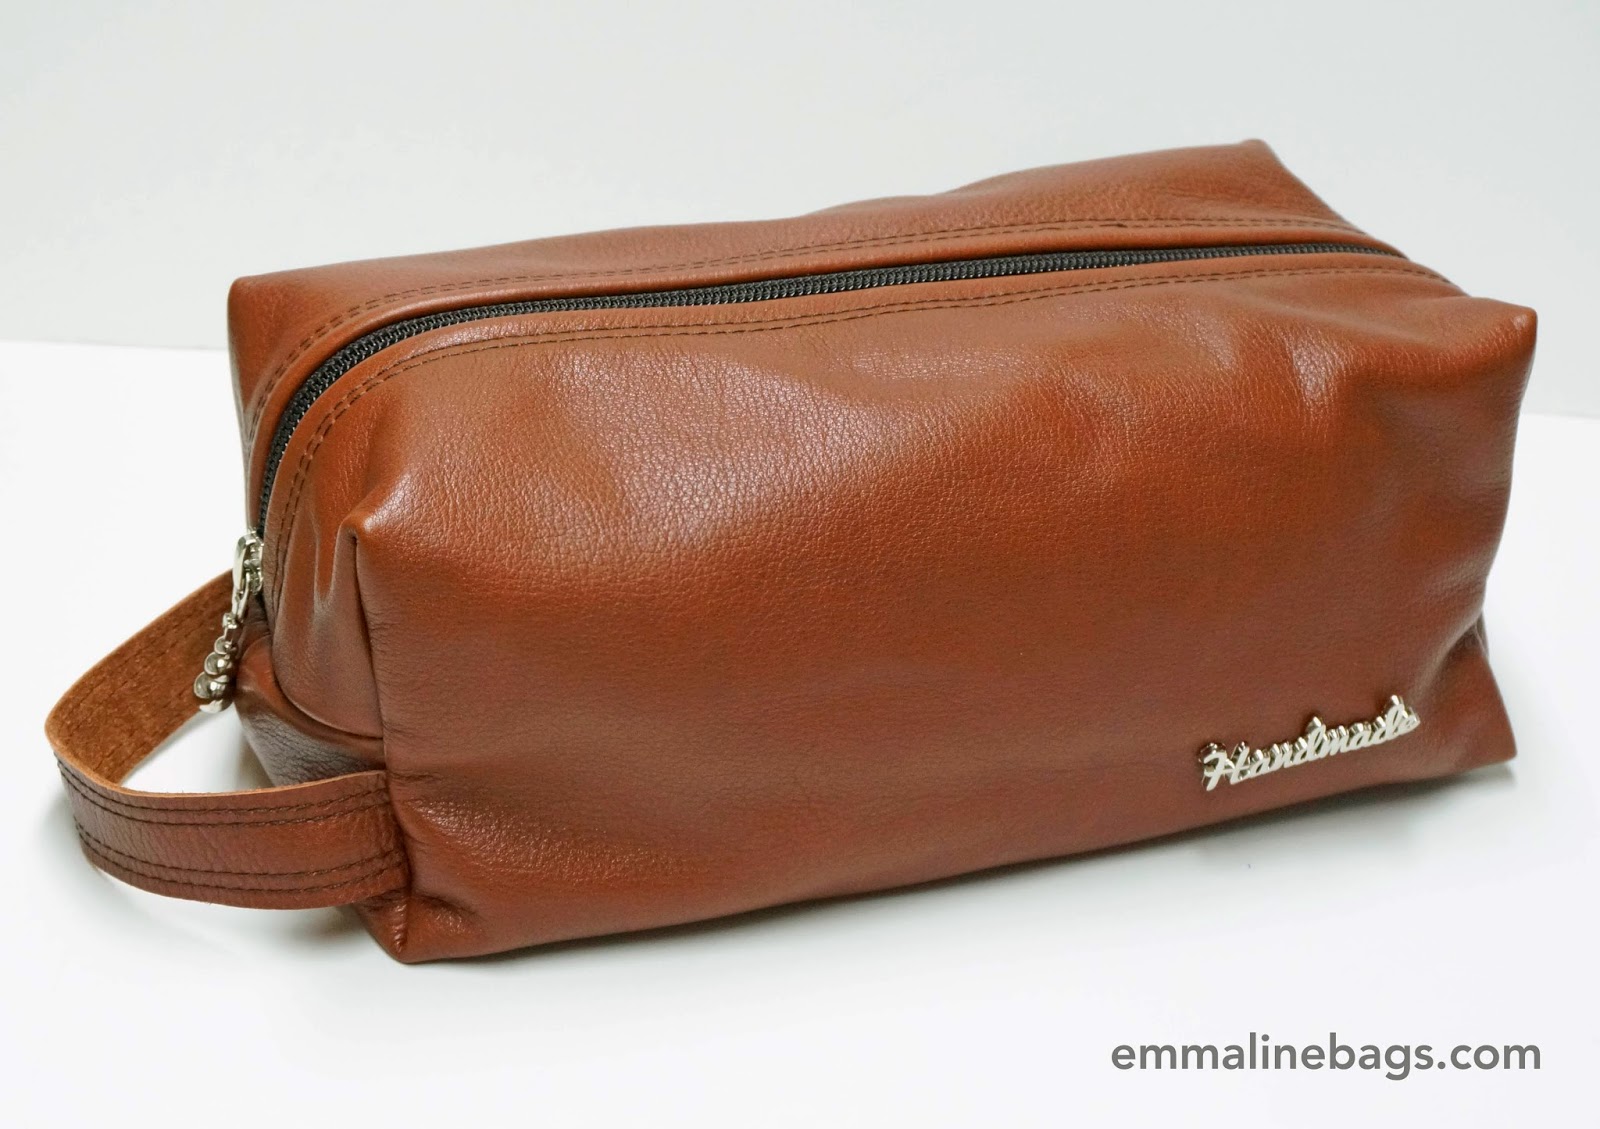 Emmaline Bags: Sewing Patterns and Purse Supplies: Leather Boxy Pouch with Ikat Lining and ...